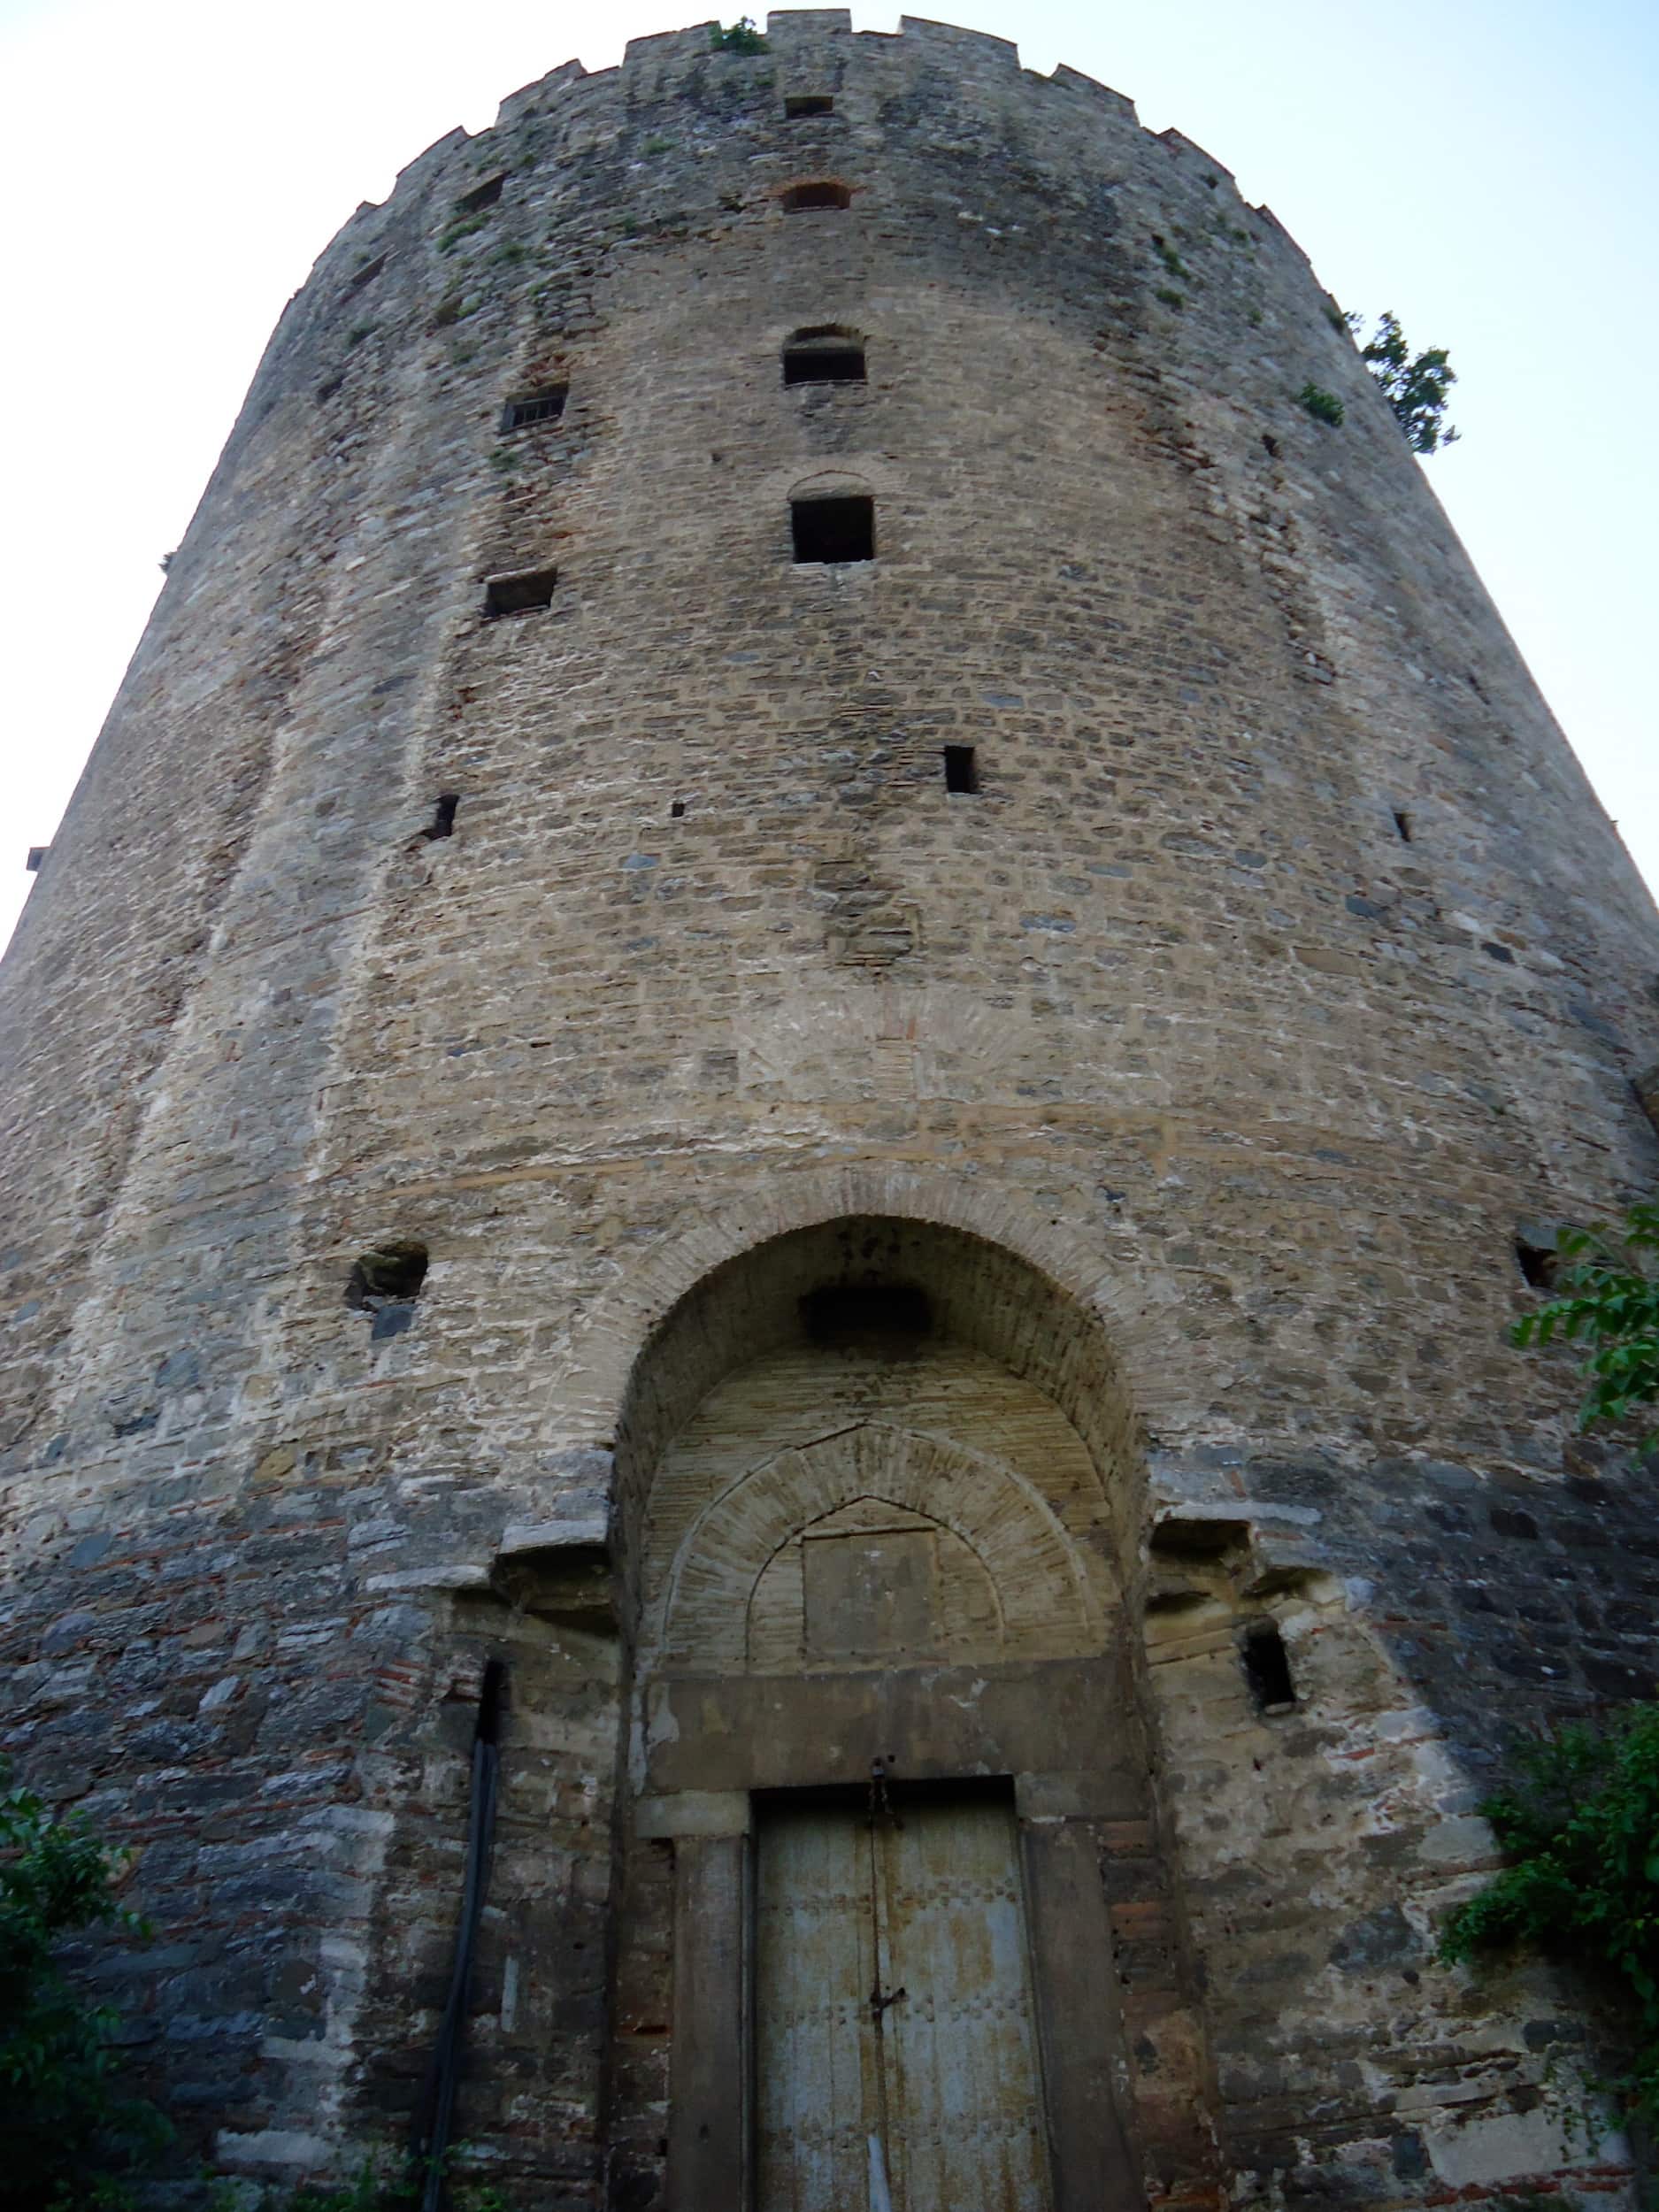 Saruca Pasha Tower at Rumeli Fortress in Istanbul, Turkey